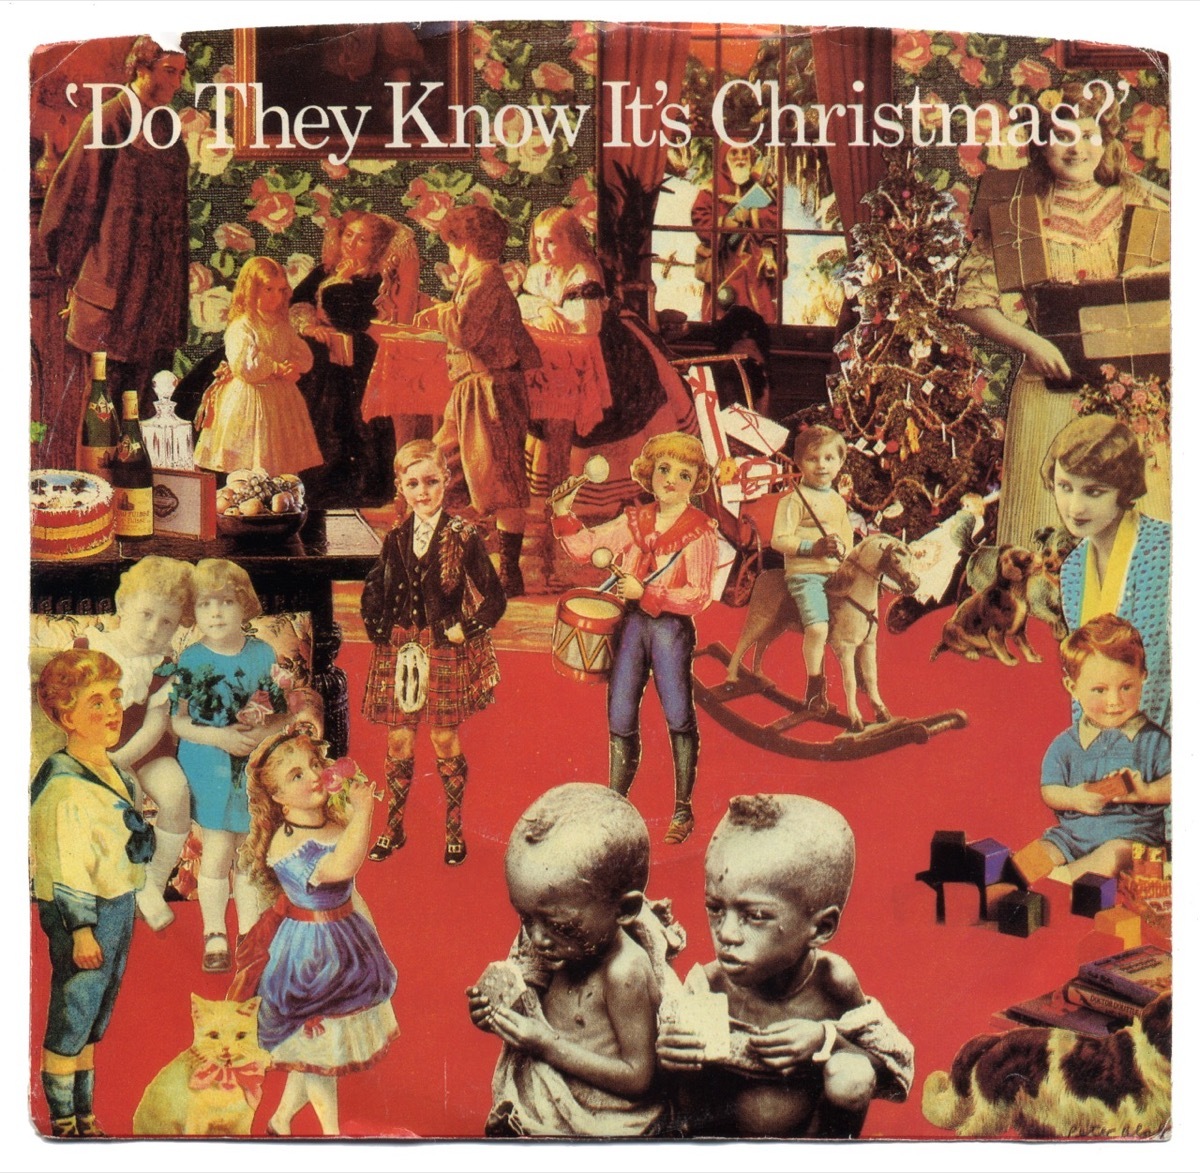 do they know it's christmas cover art, 1980s nostalgia